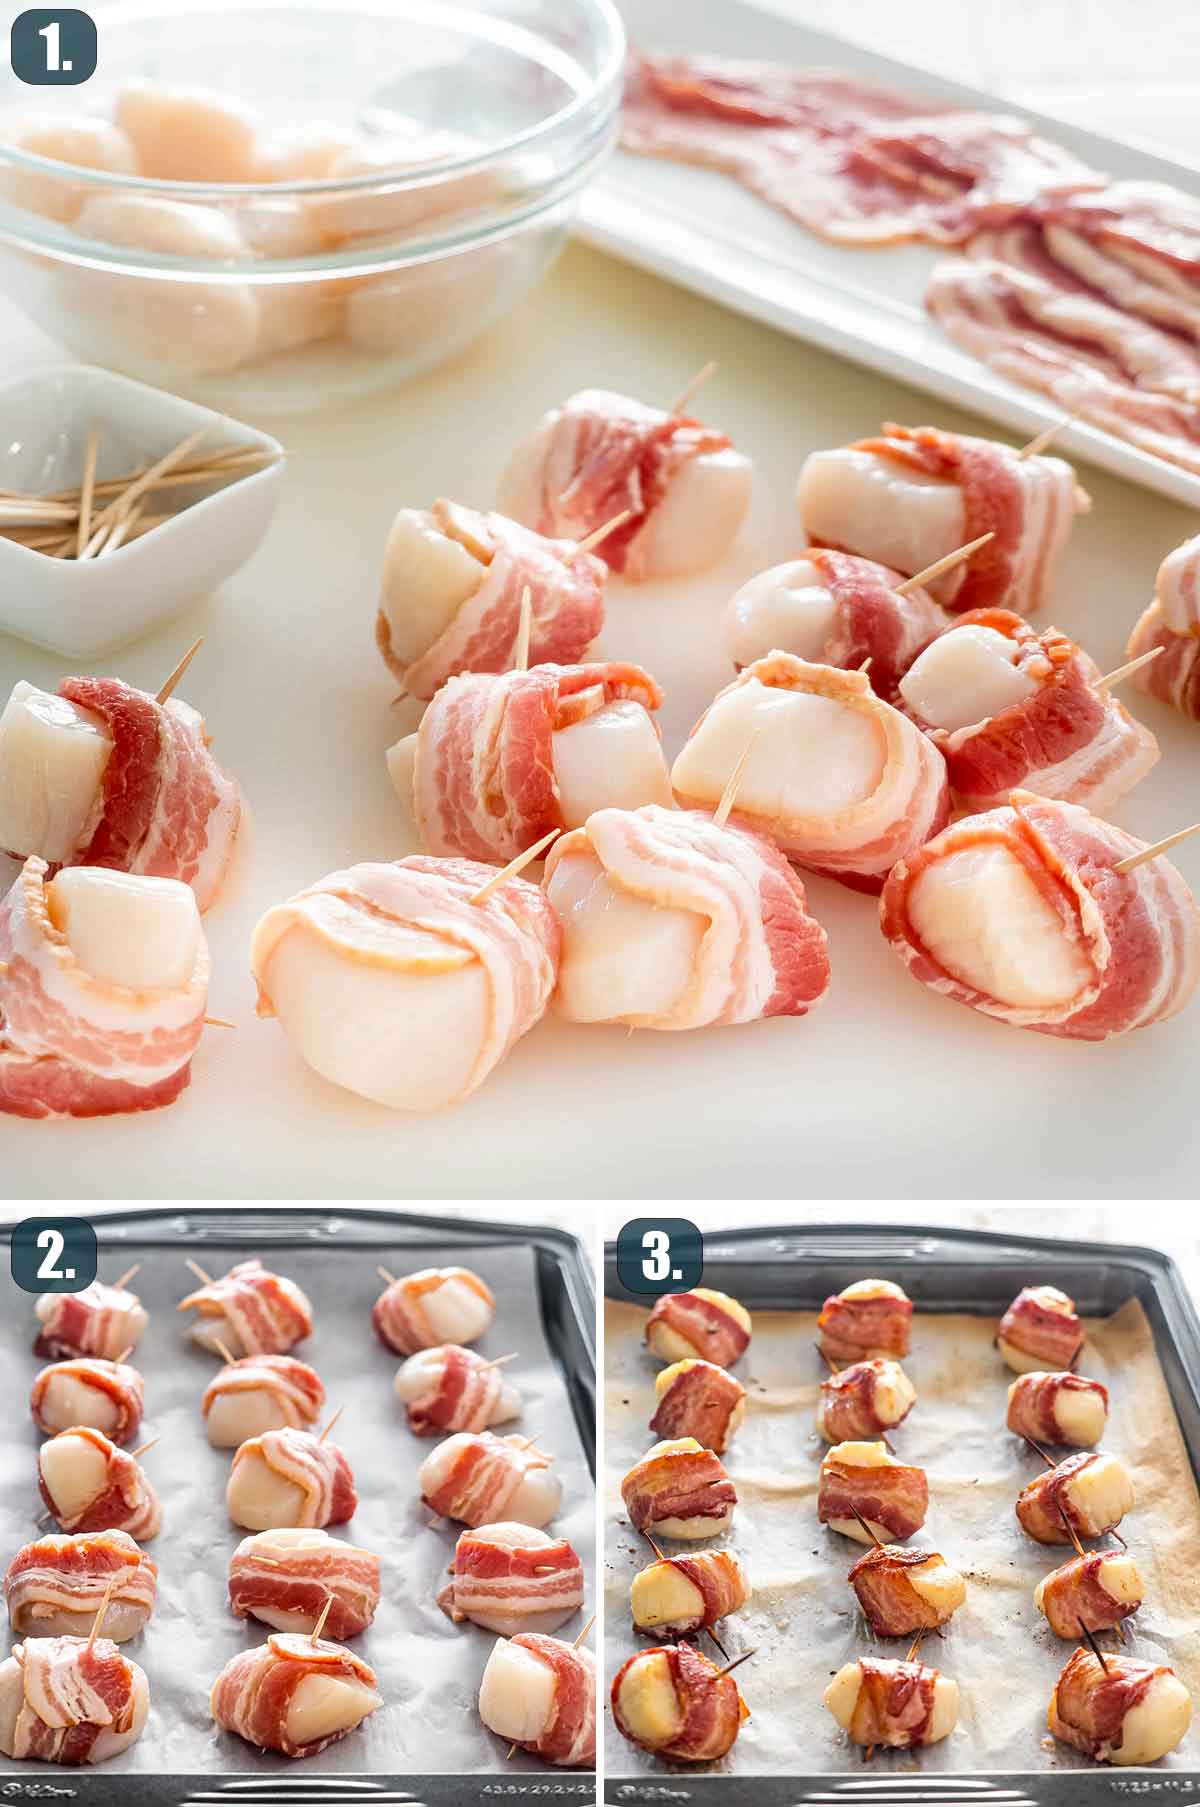 process shots showing how to make bacon wrapped scallops.